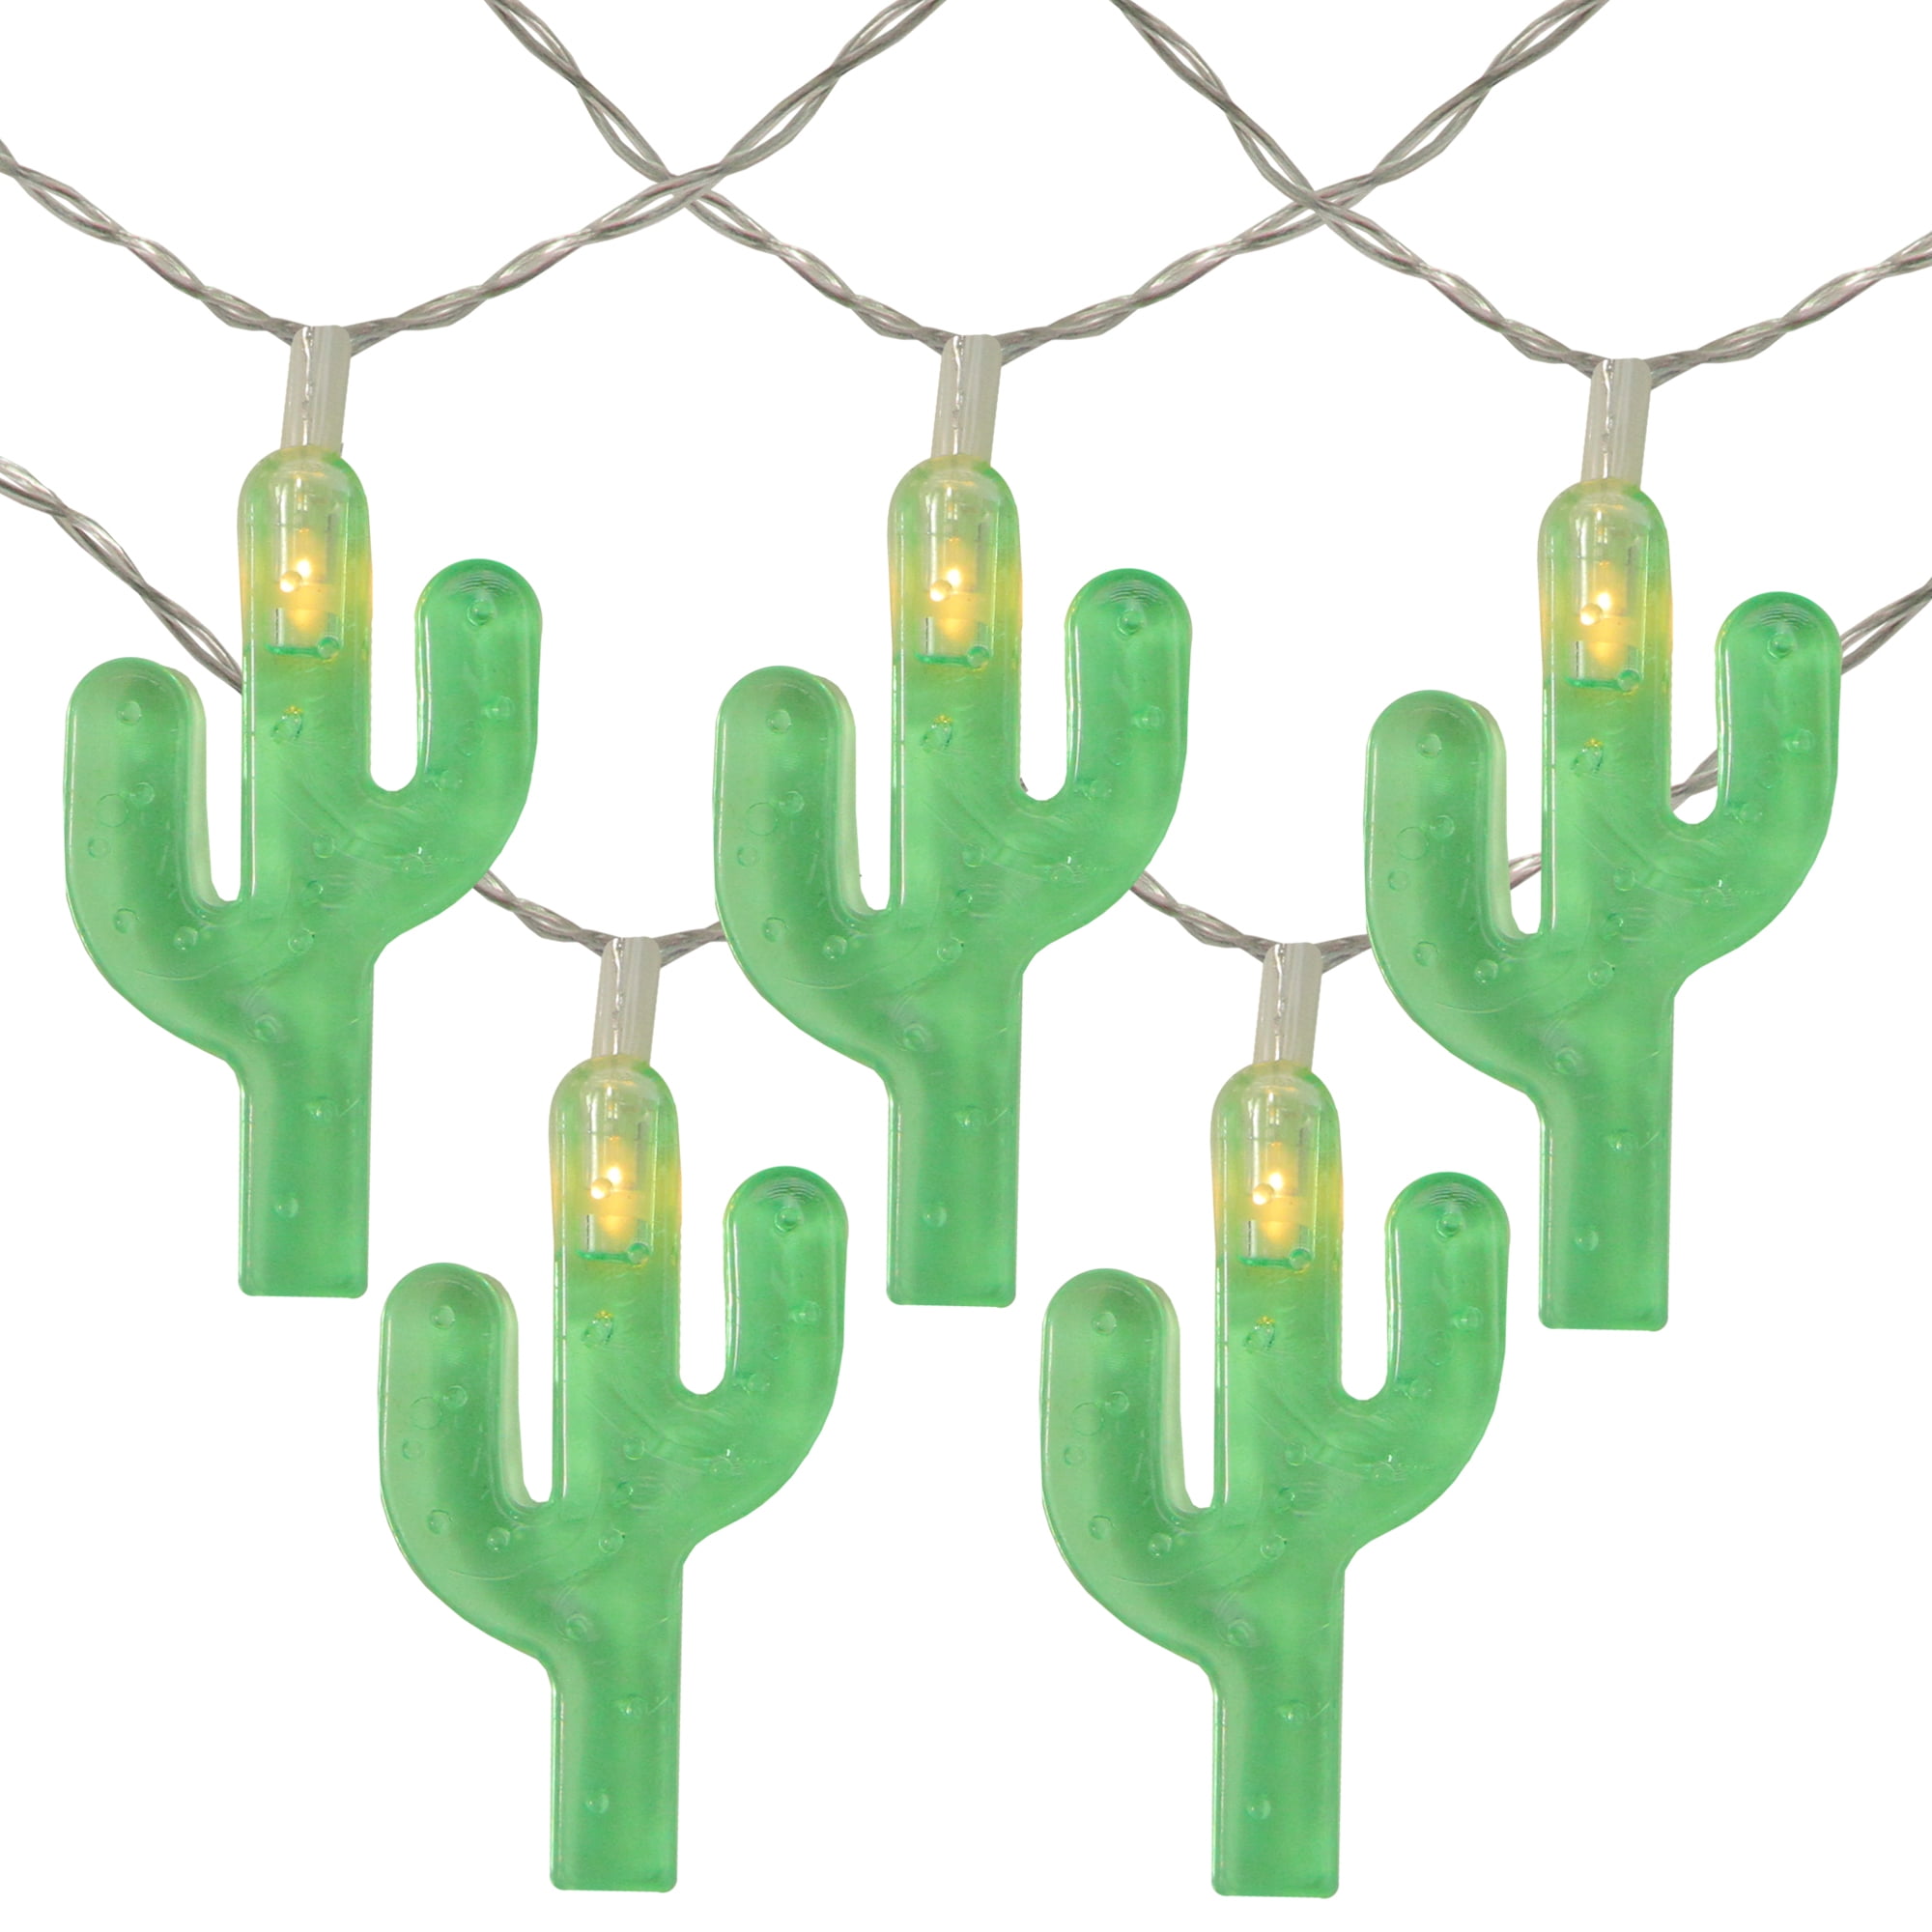 Green Cactus LED Fairy Lights DIY Copper String Chain Christmas Holiday Garland 